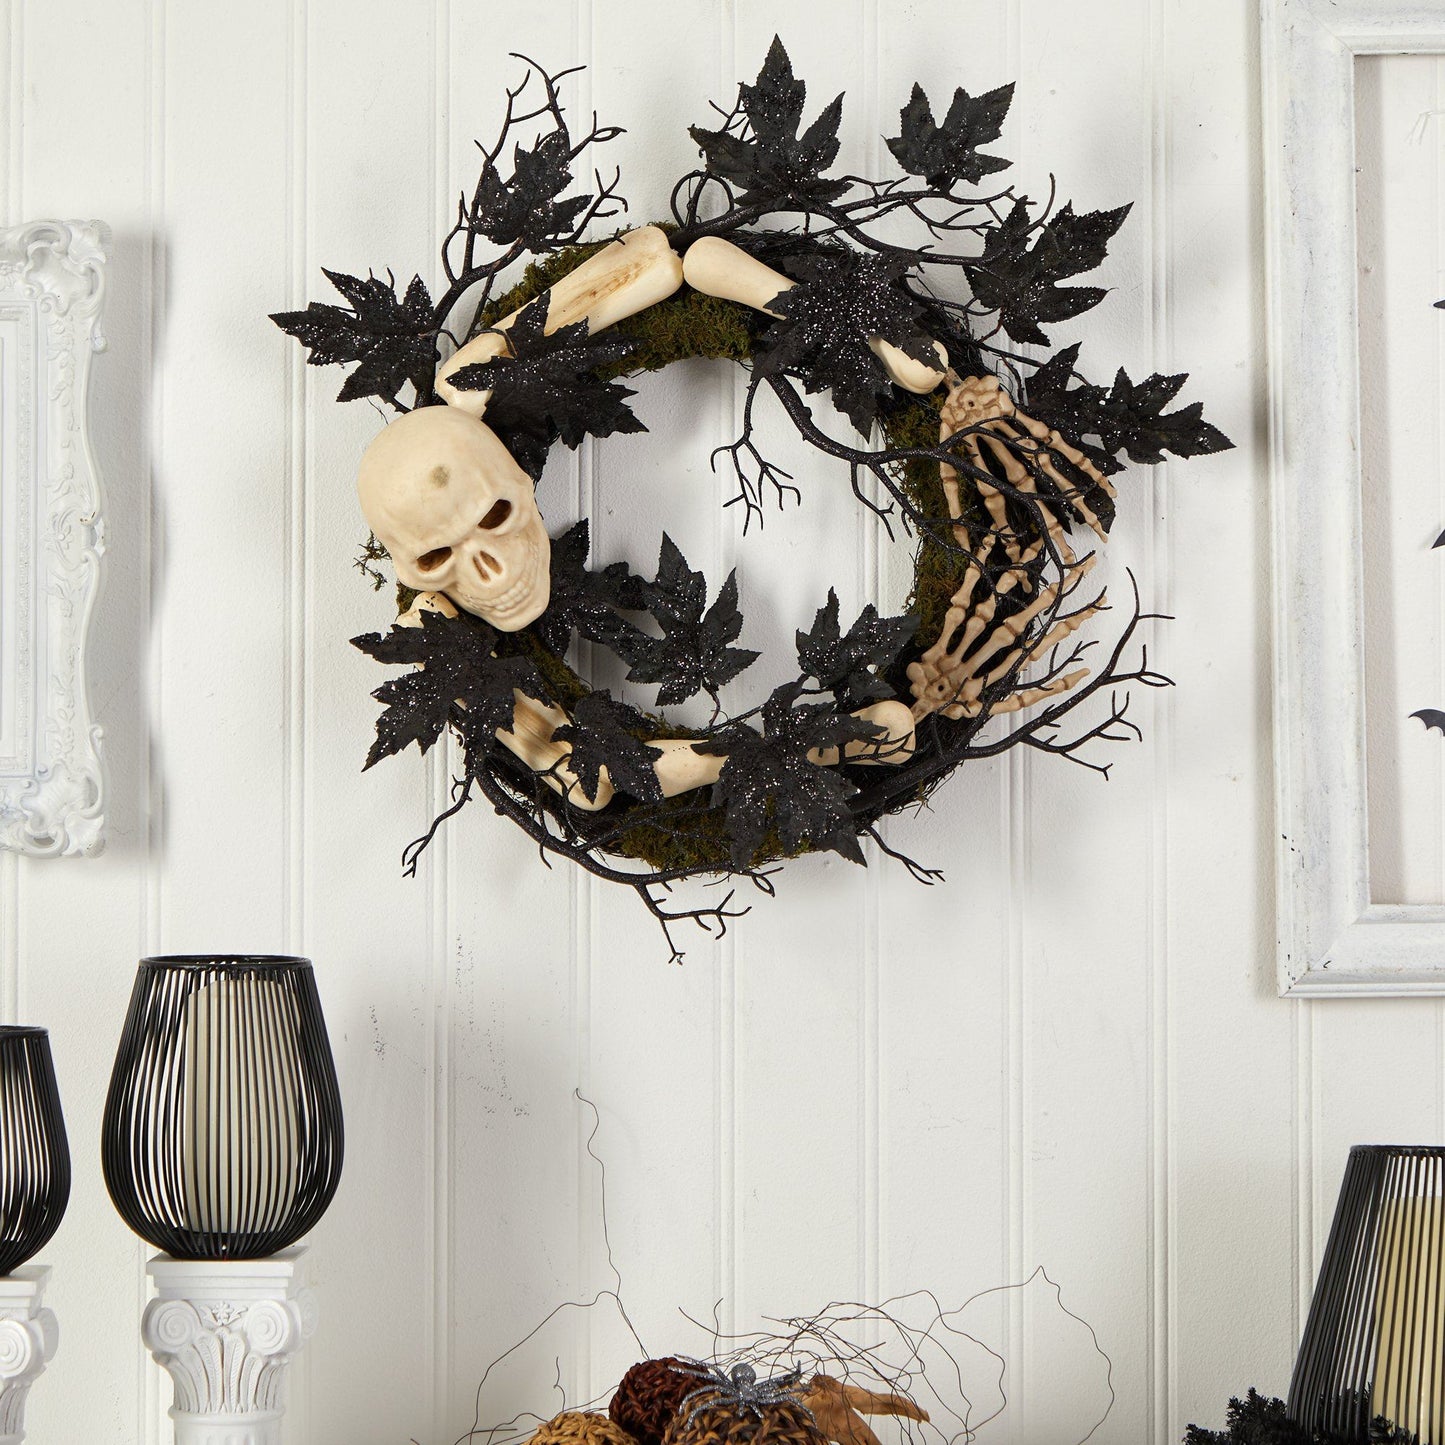 24" Halloween Skull and Bones Wreath" by Nearly Natural